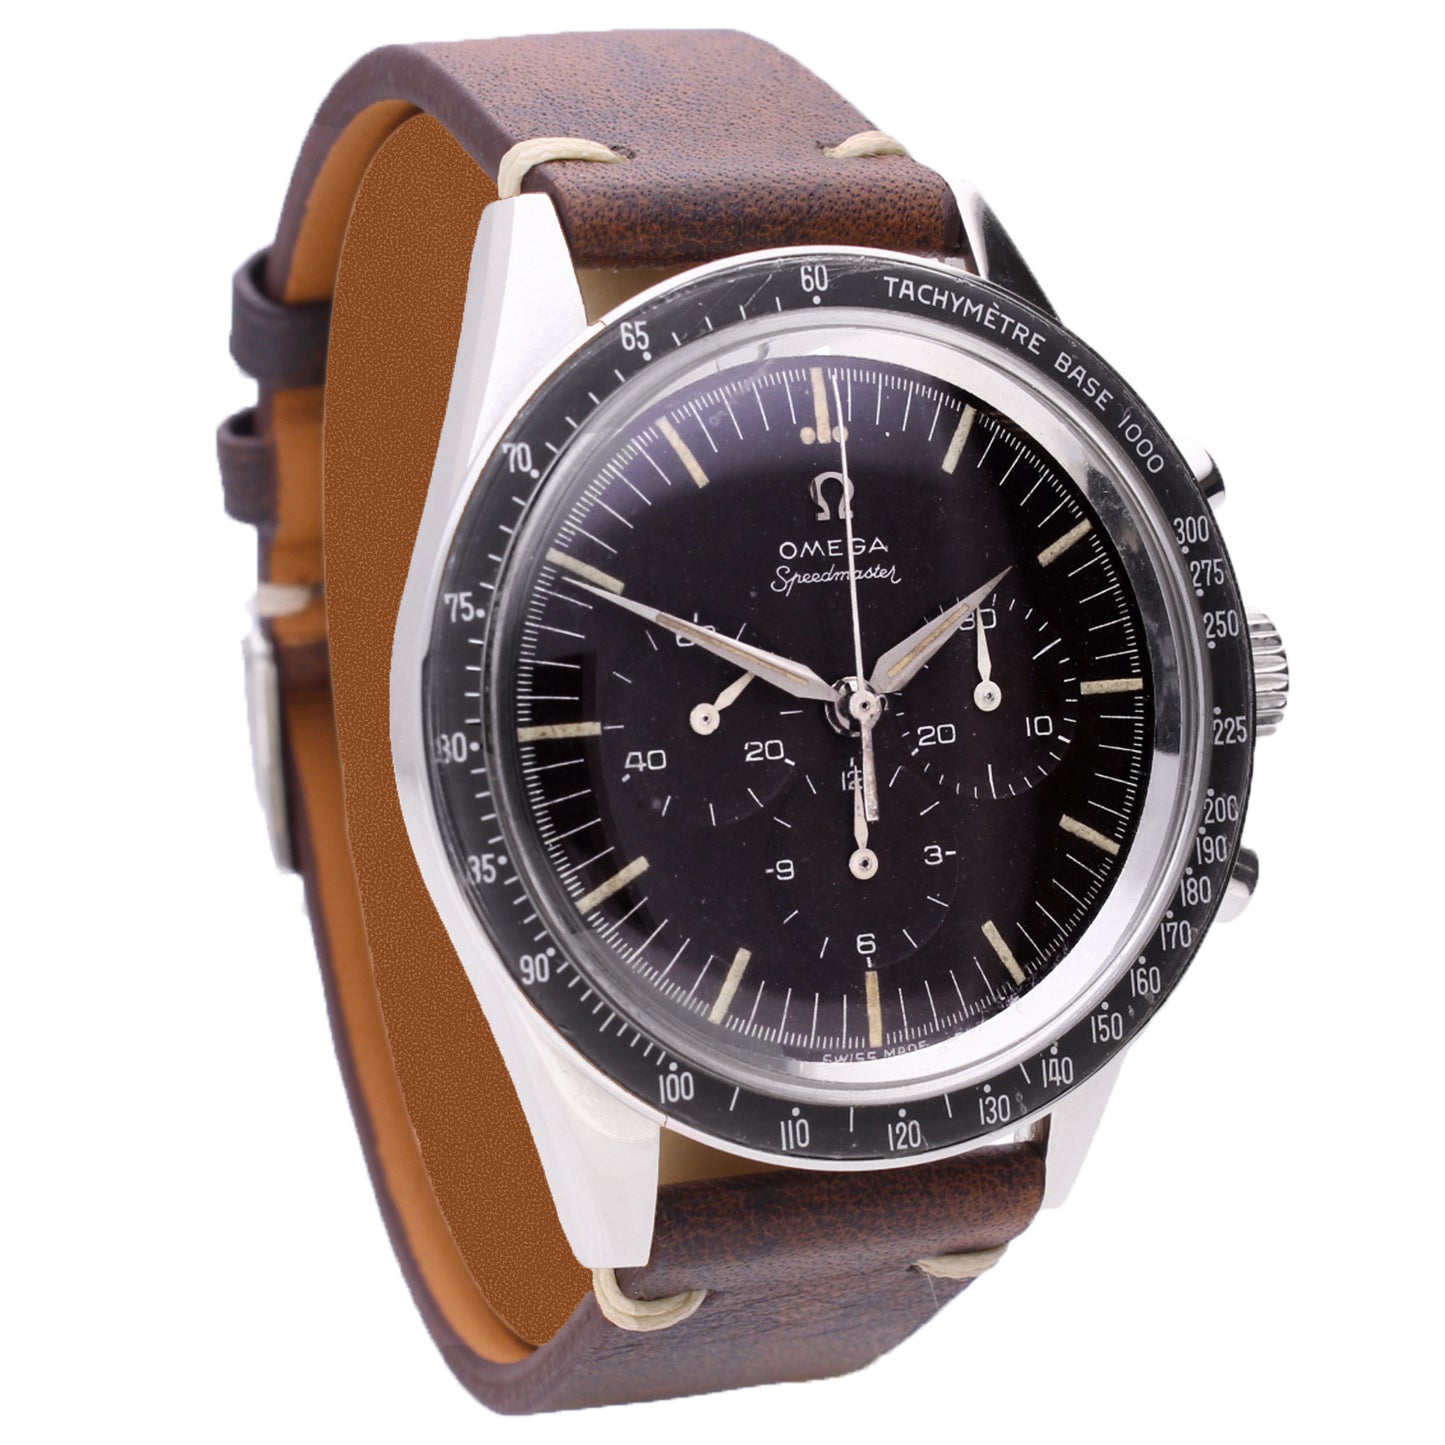 Stainless steel OMEGA, reference 2998-1 Speedmaster chronograph wristwatch. Made 1960